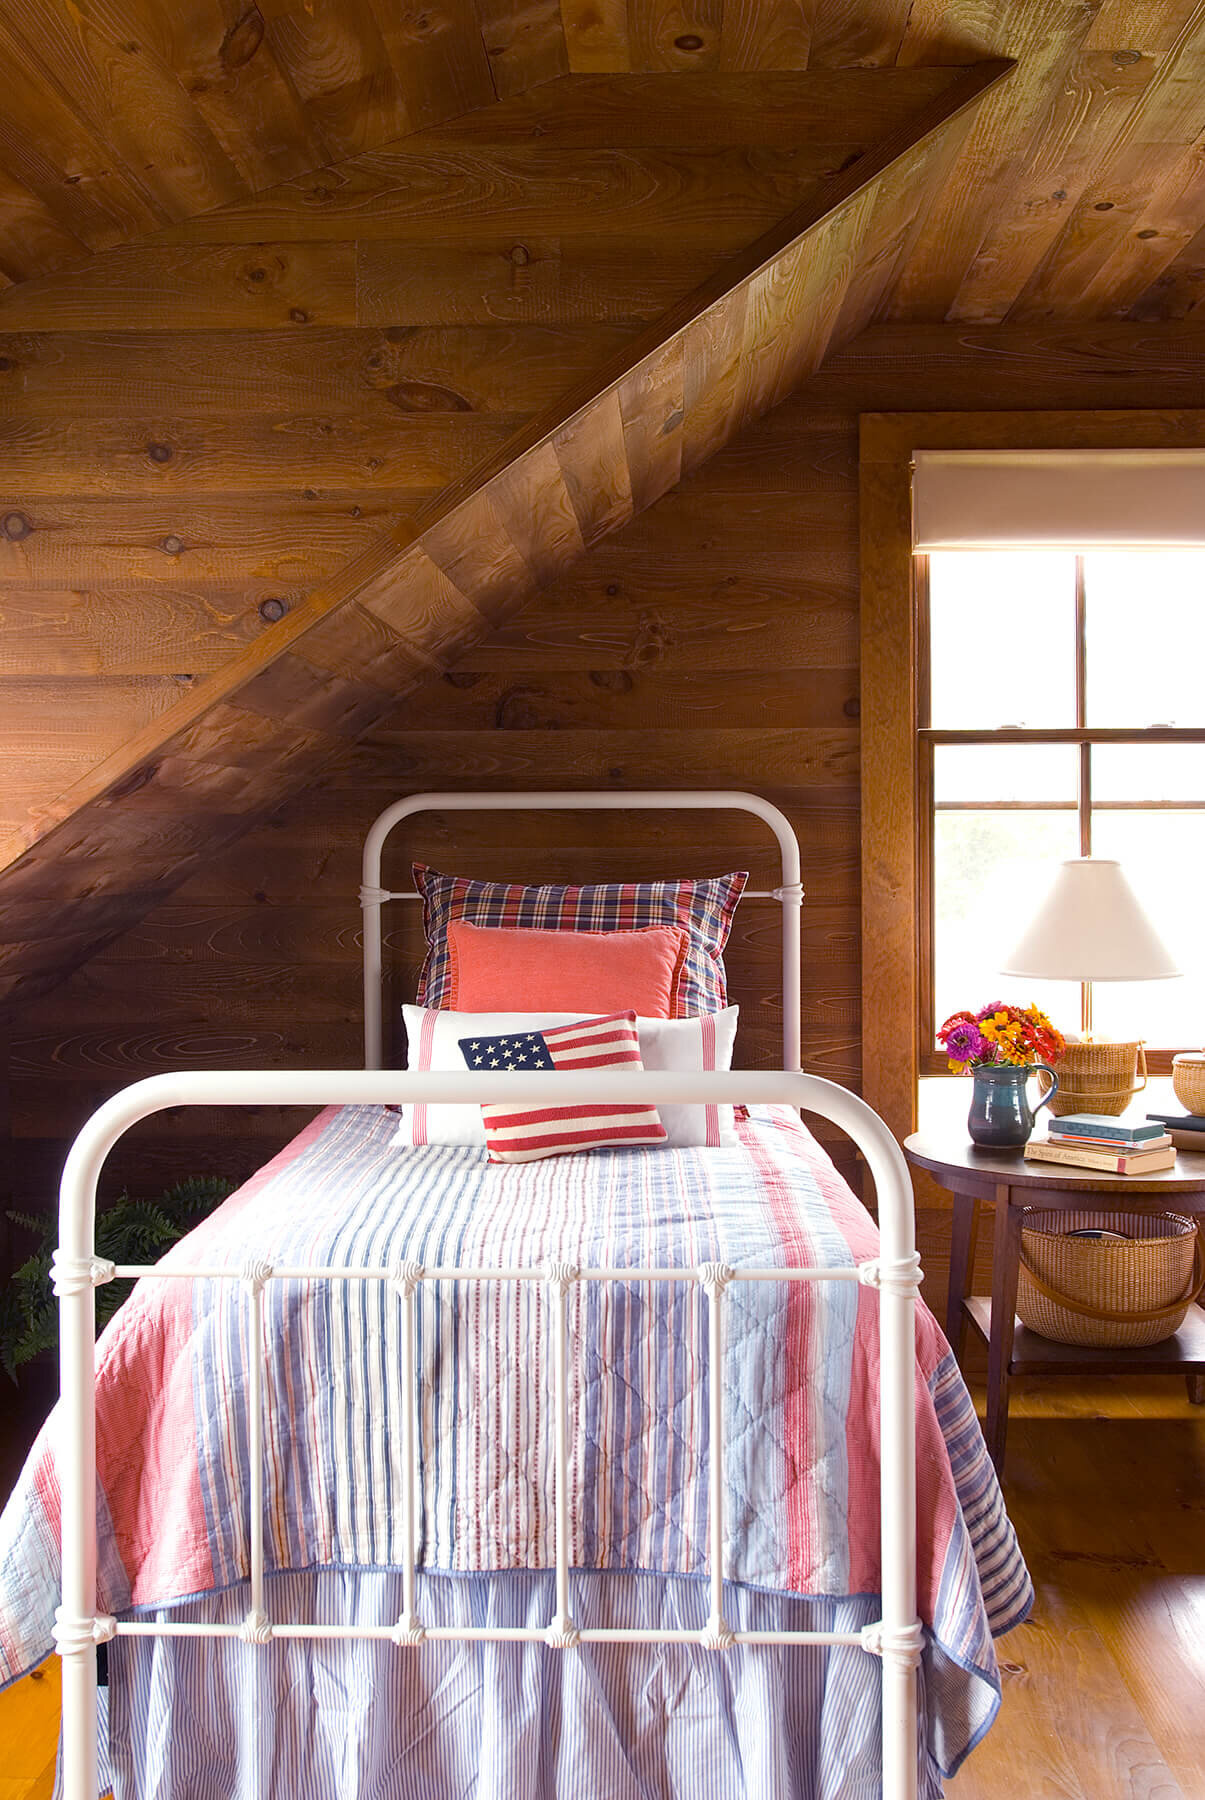 Campy guest bedroom with old pine walls.